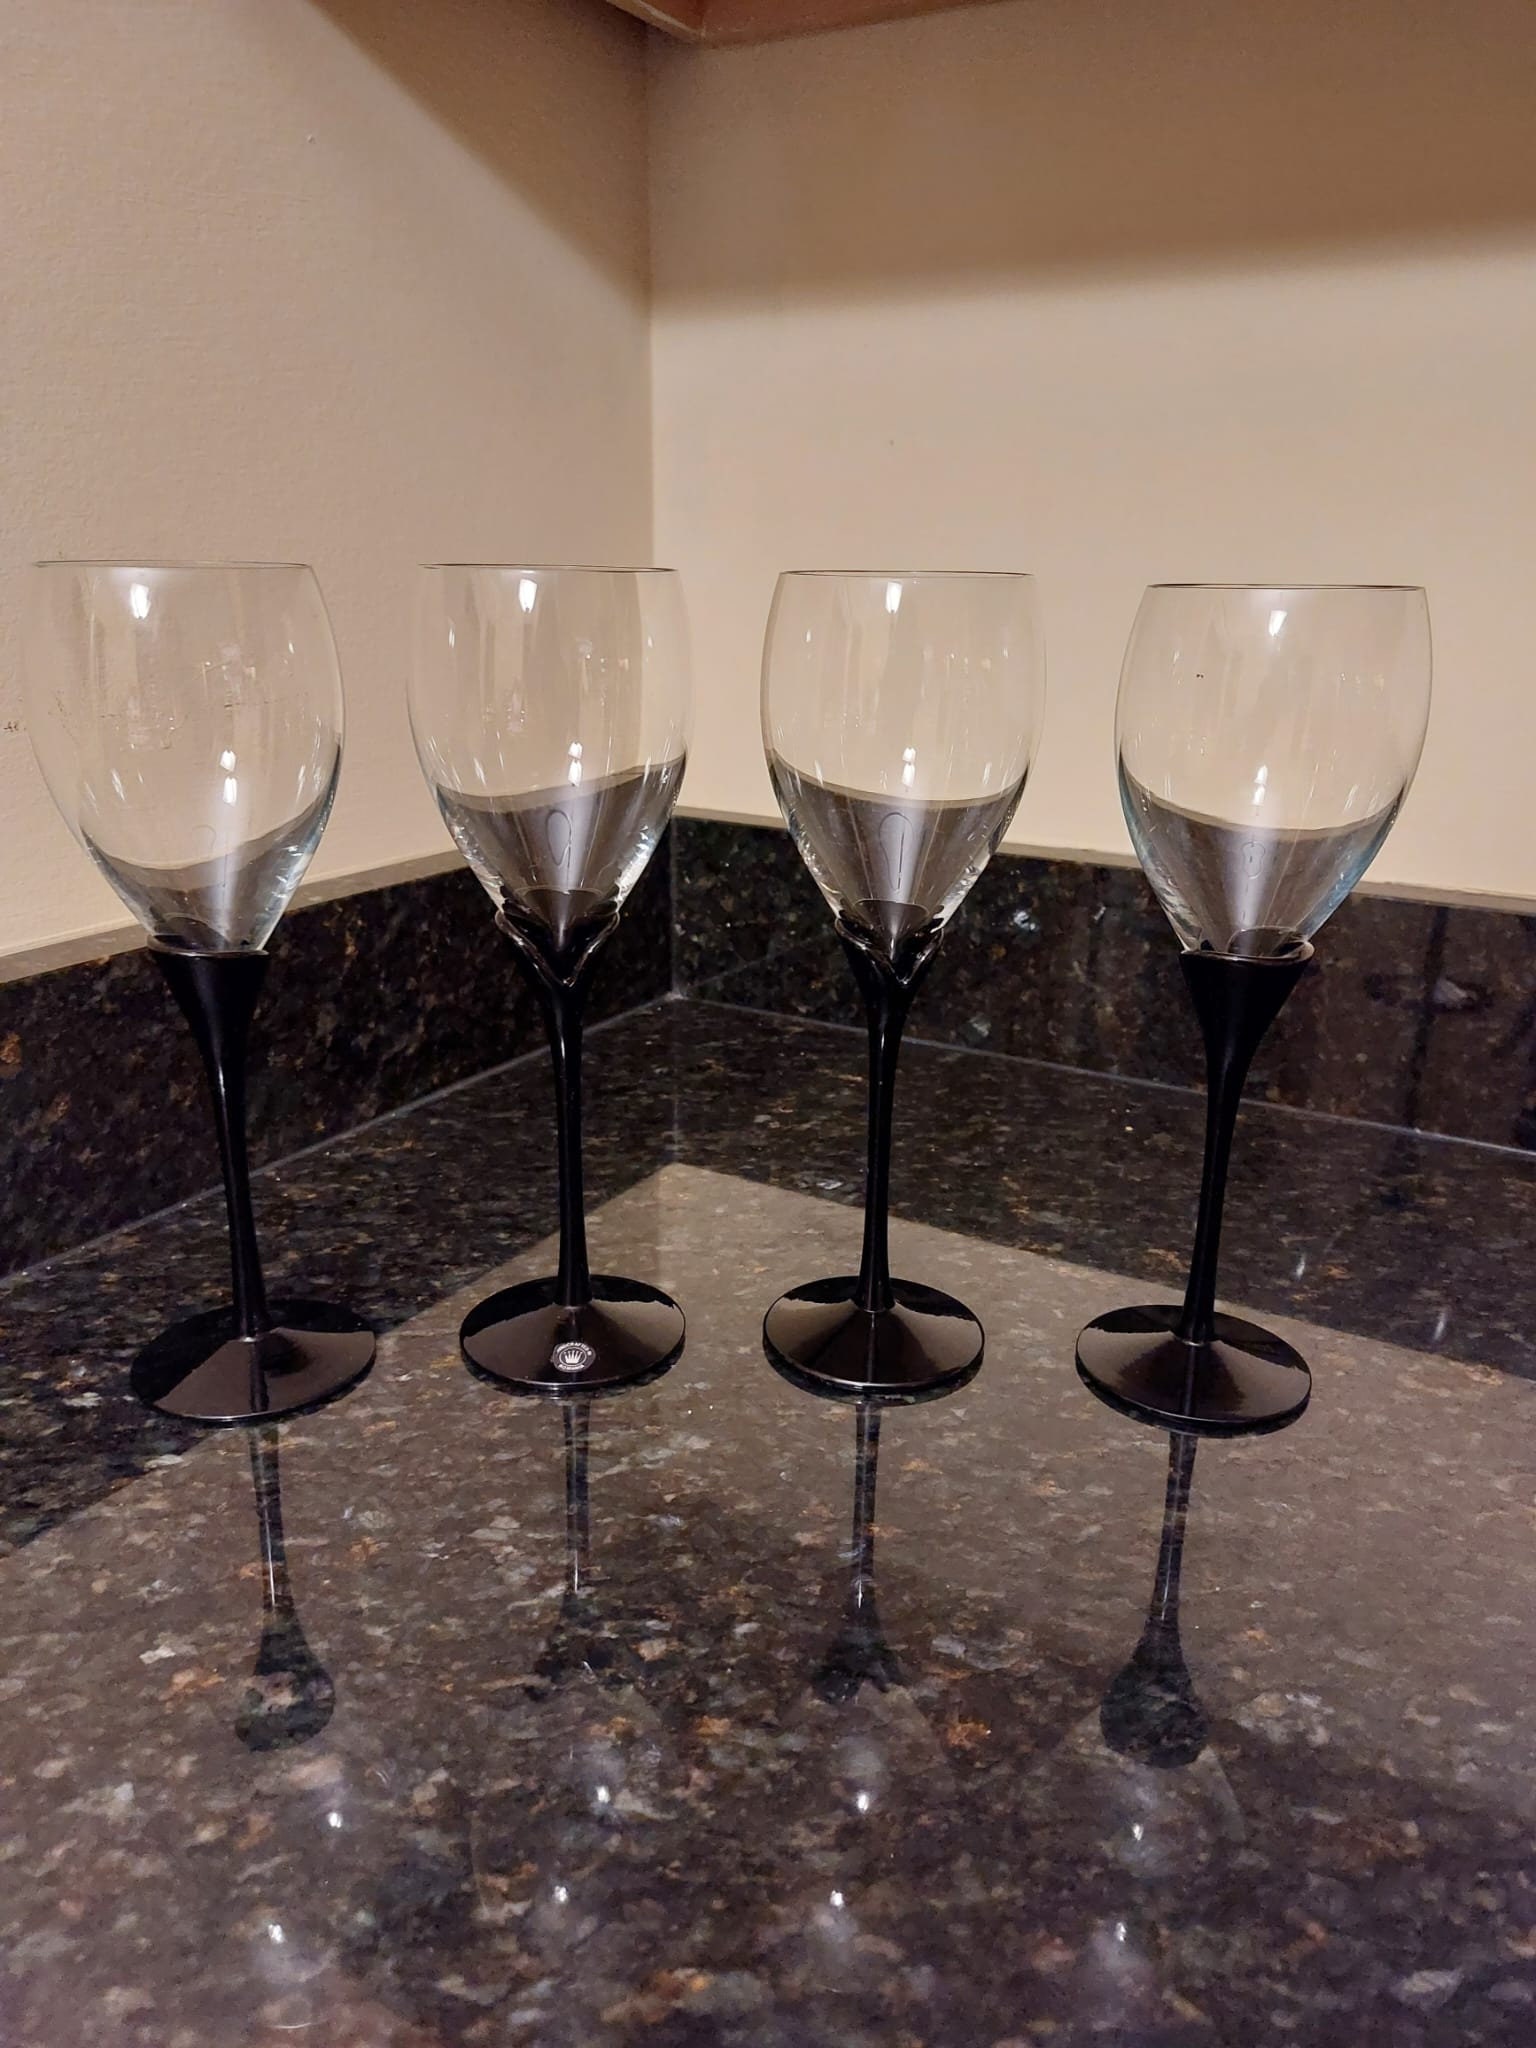 Circleware Tall 8.75 Wine Glass in Multi Color Tops and Ballooned Stem 